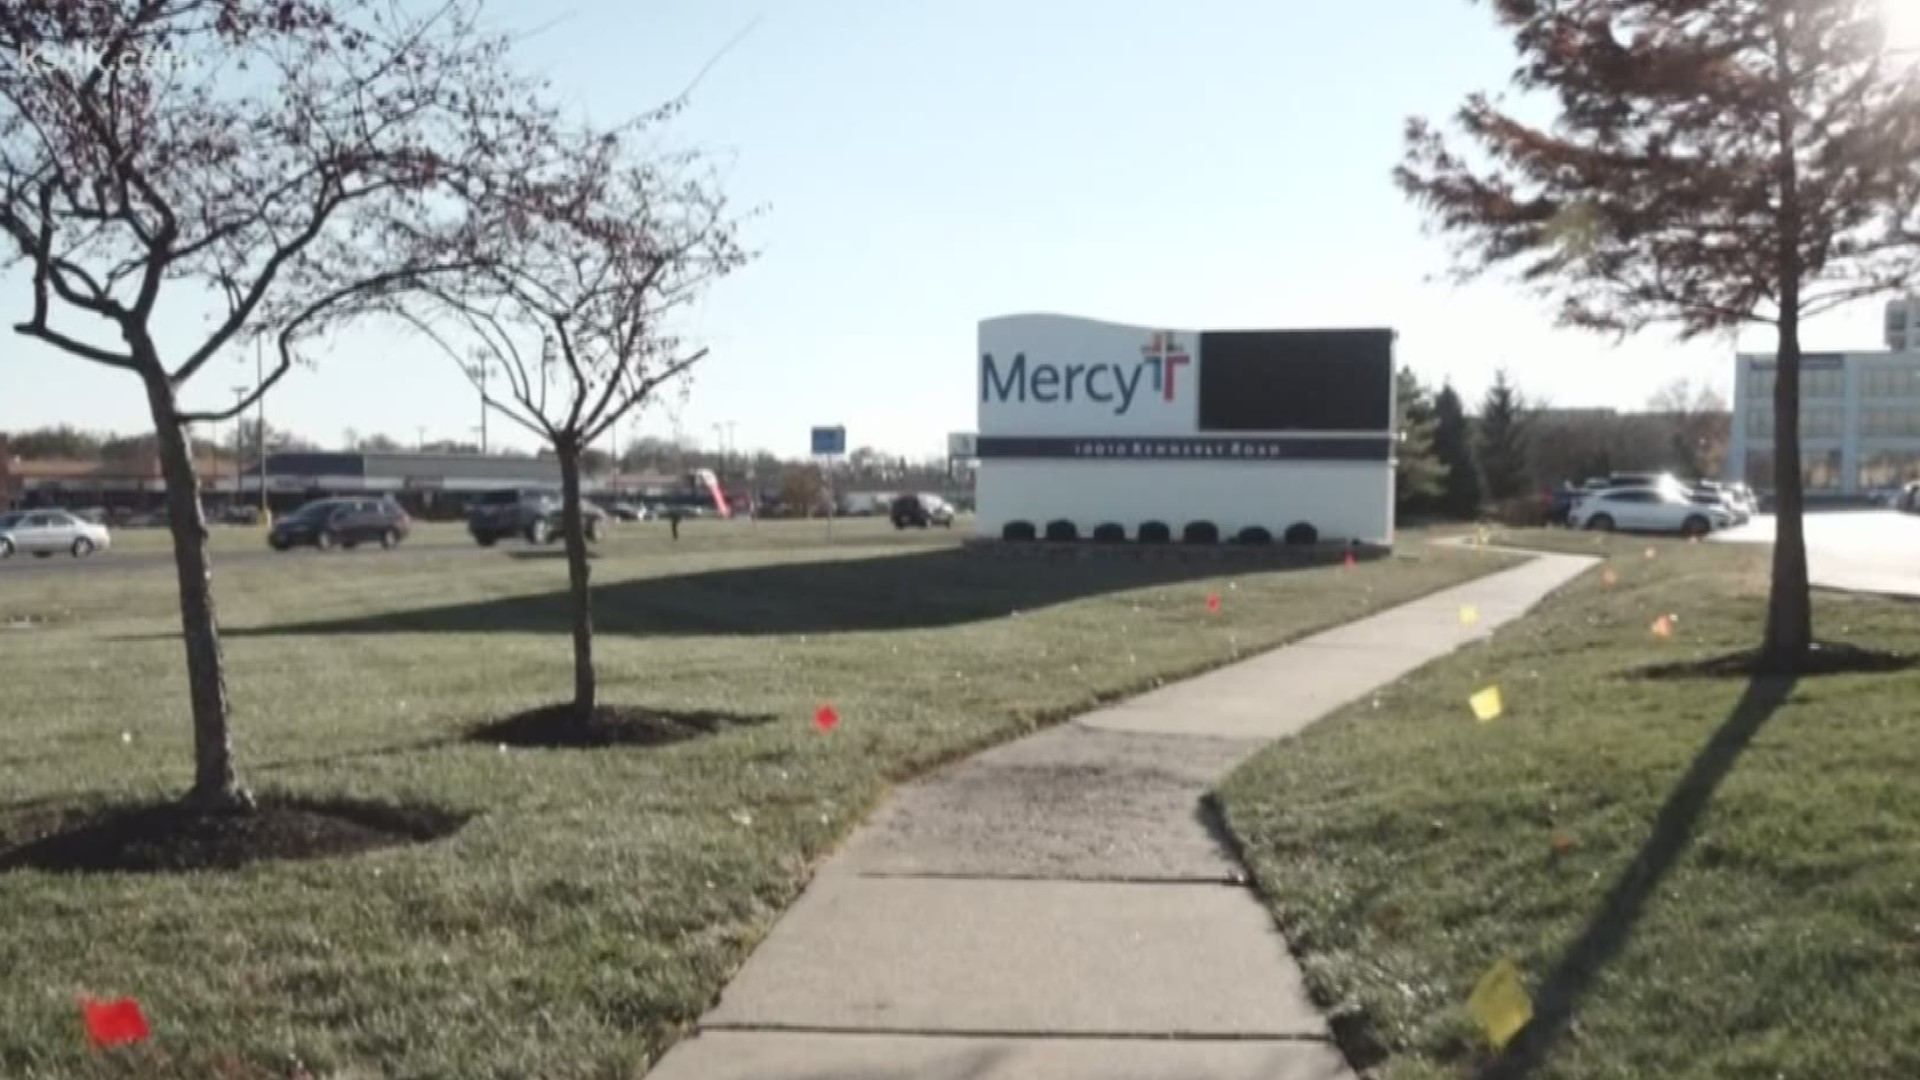 Mercy Hospital St. Louis ranked in the top 50 out of more than 1,000 hospitals evaluated.